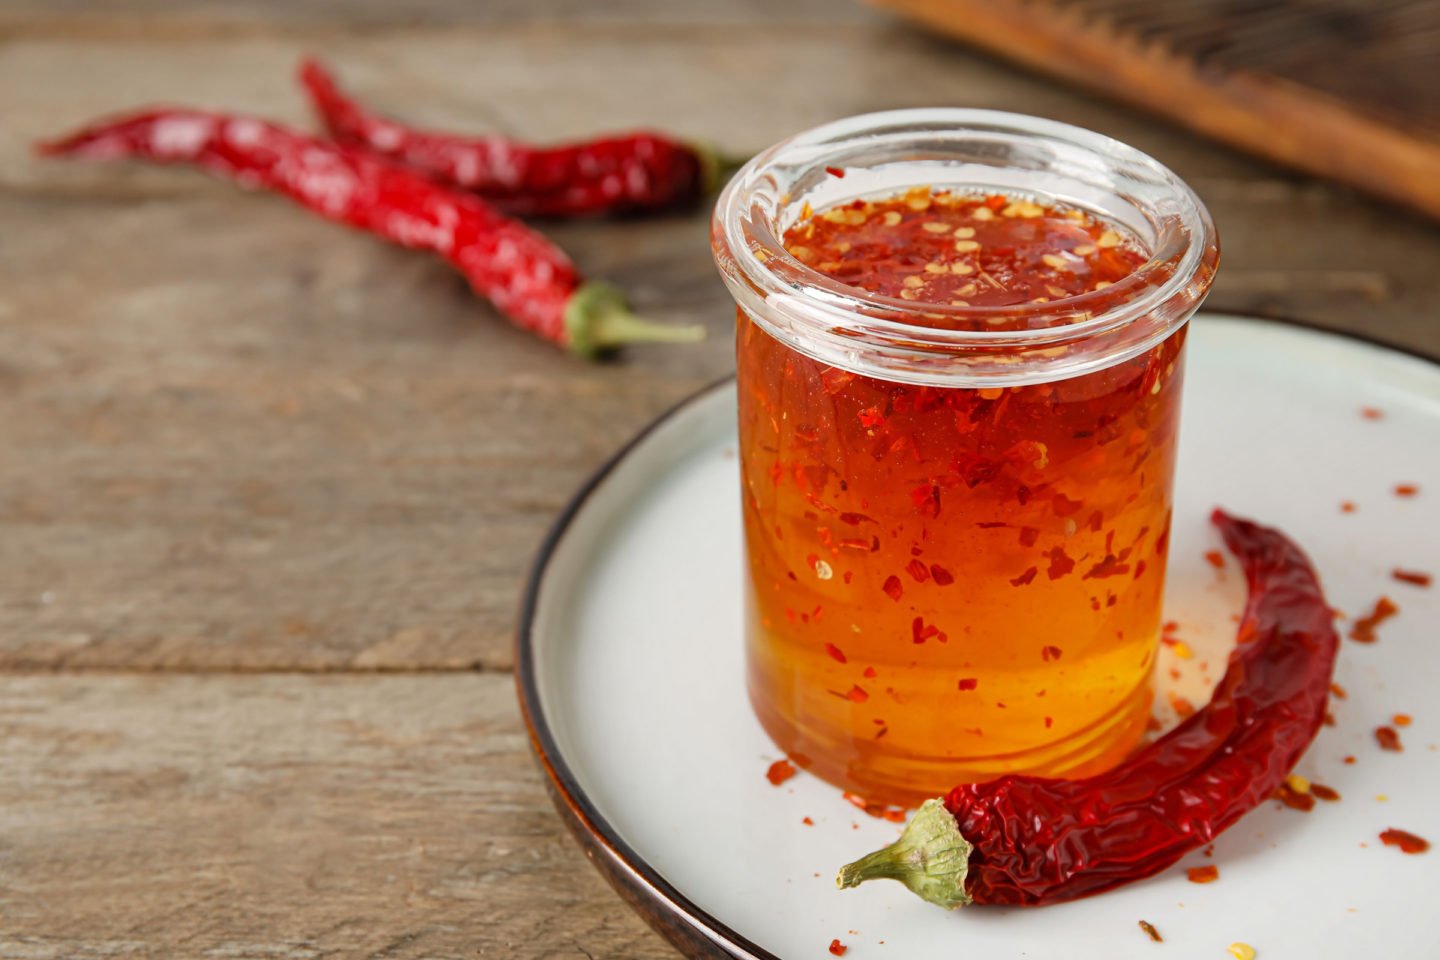 spicy honey with chili pepper